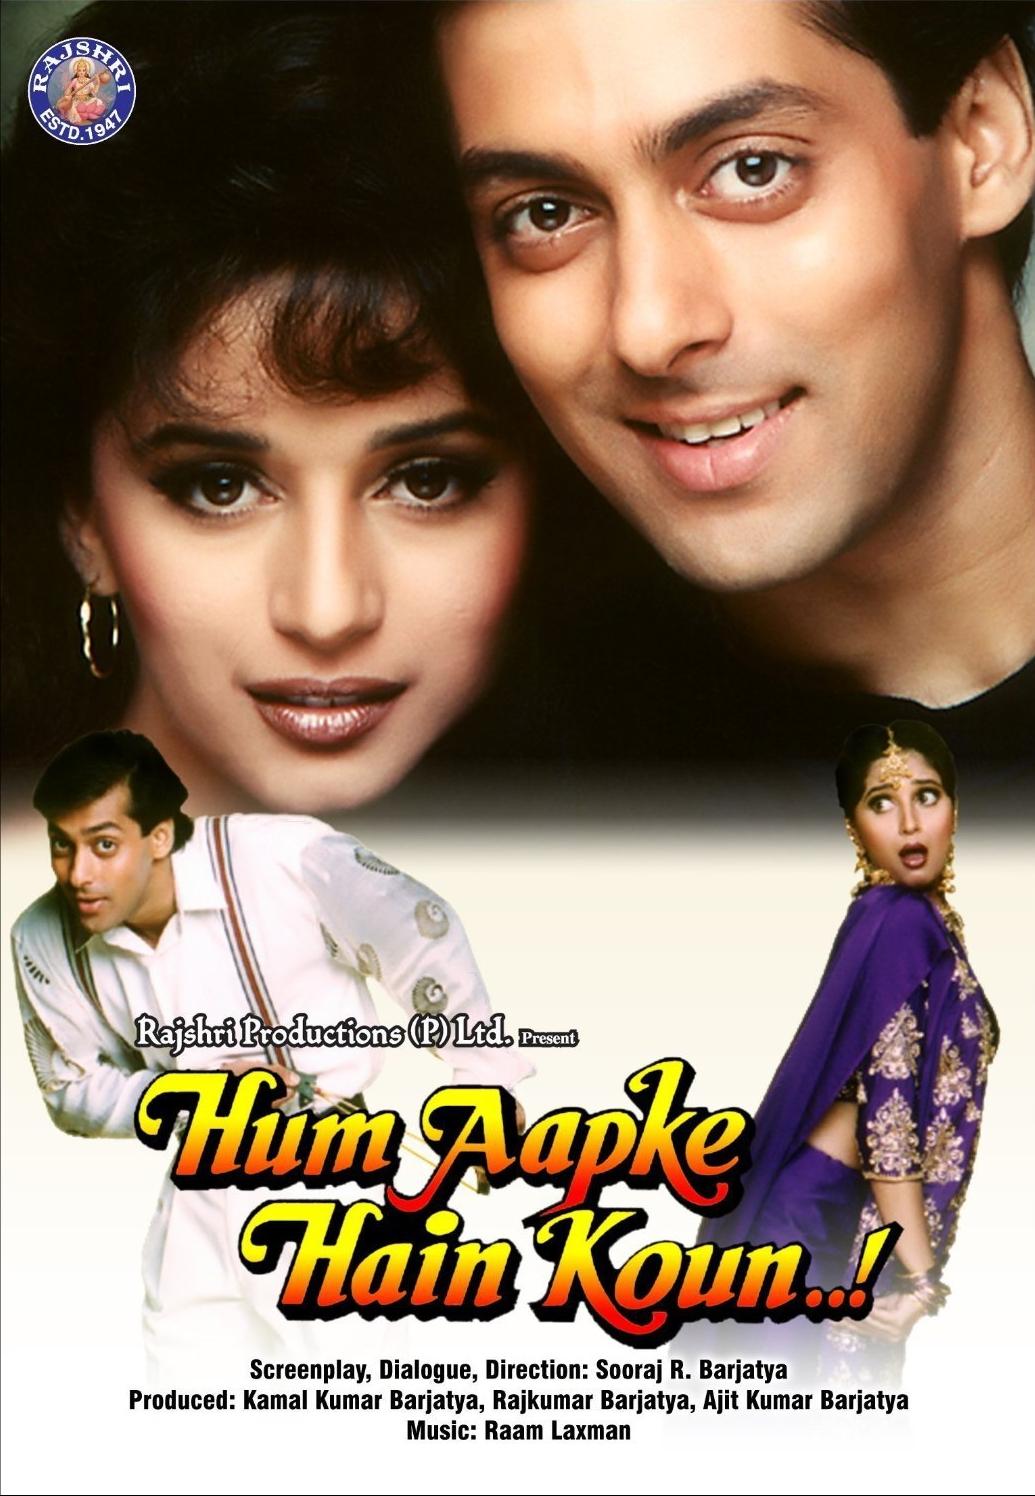 As 'Prem' in this family-centric movie, Salman showcased the values of love and unity